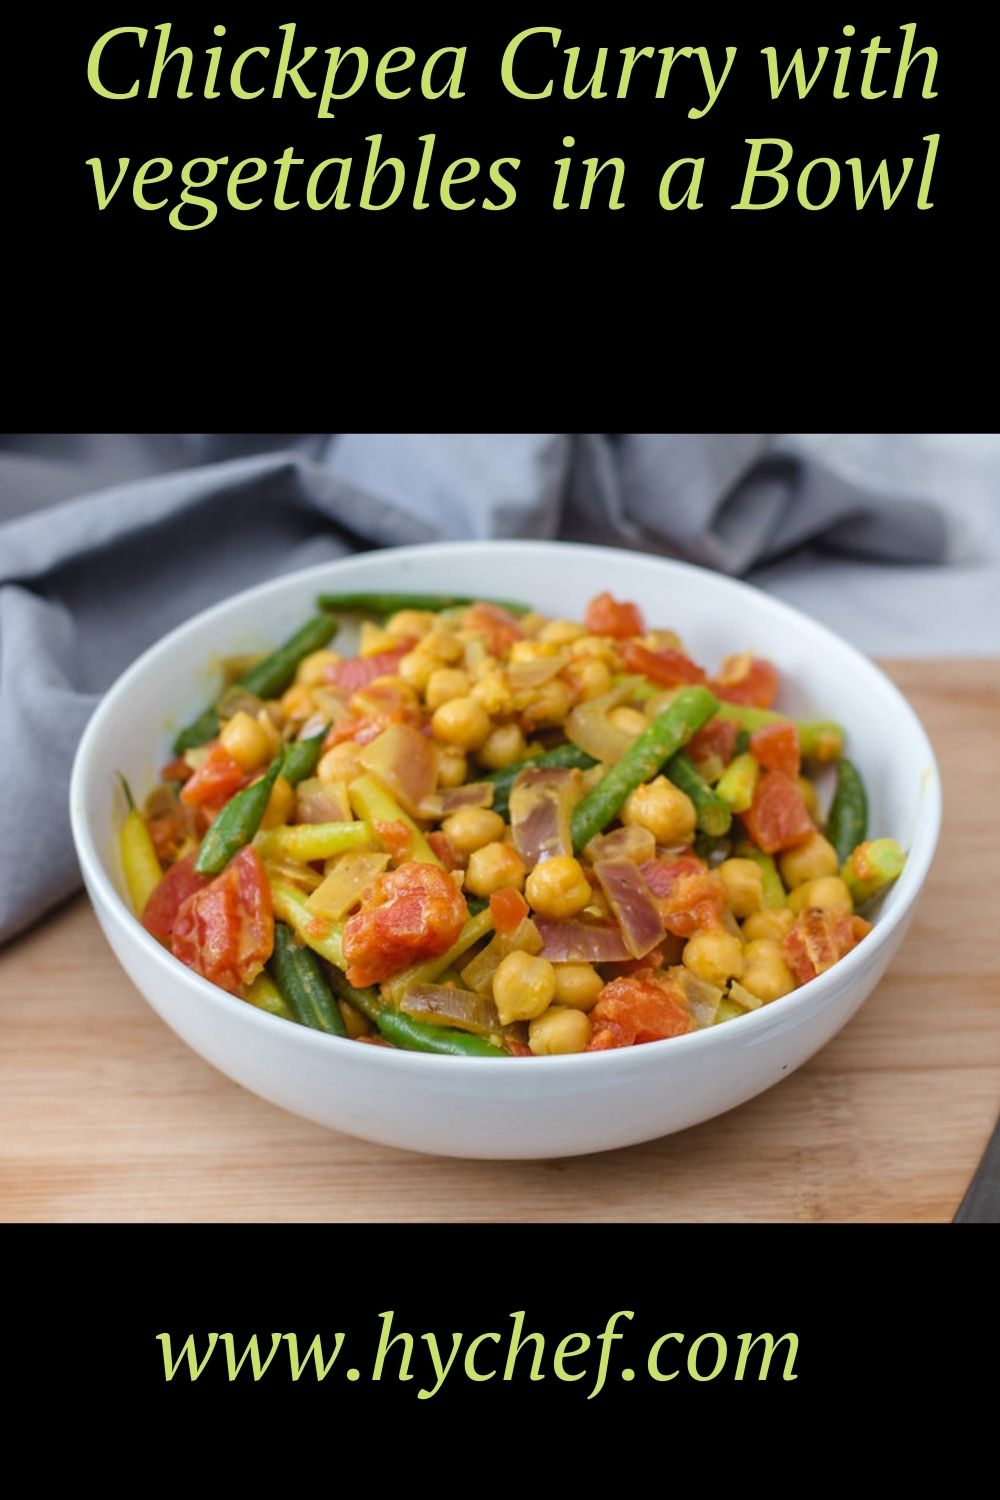 Chickpea Curry with vegetables in a Bowl